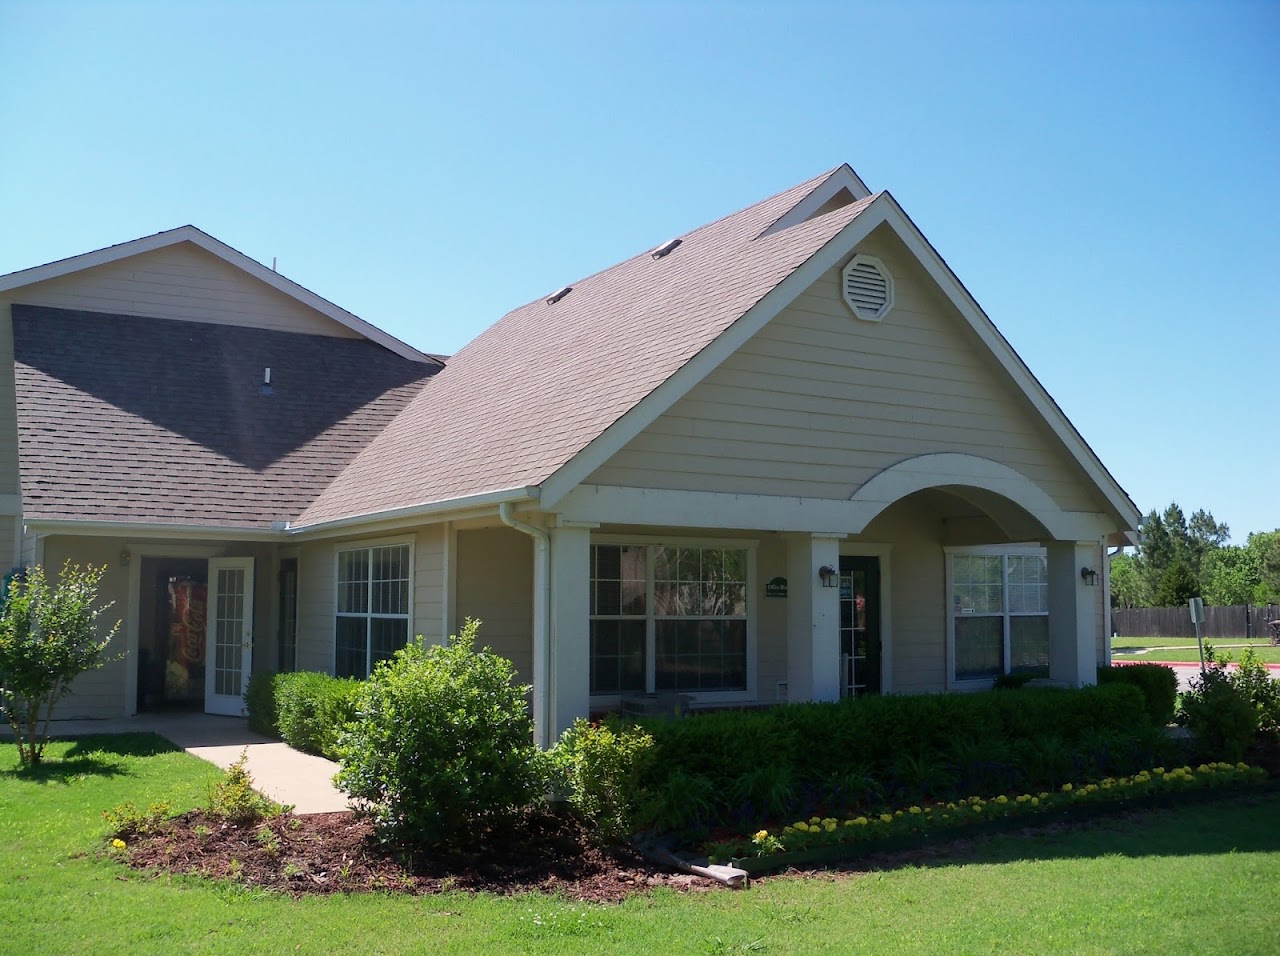 Photo of THE GARDENS AT PRYOR CREEK. Affordable housing located at 700 N ELLIOTT ST PRYOR, OK 74361